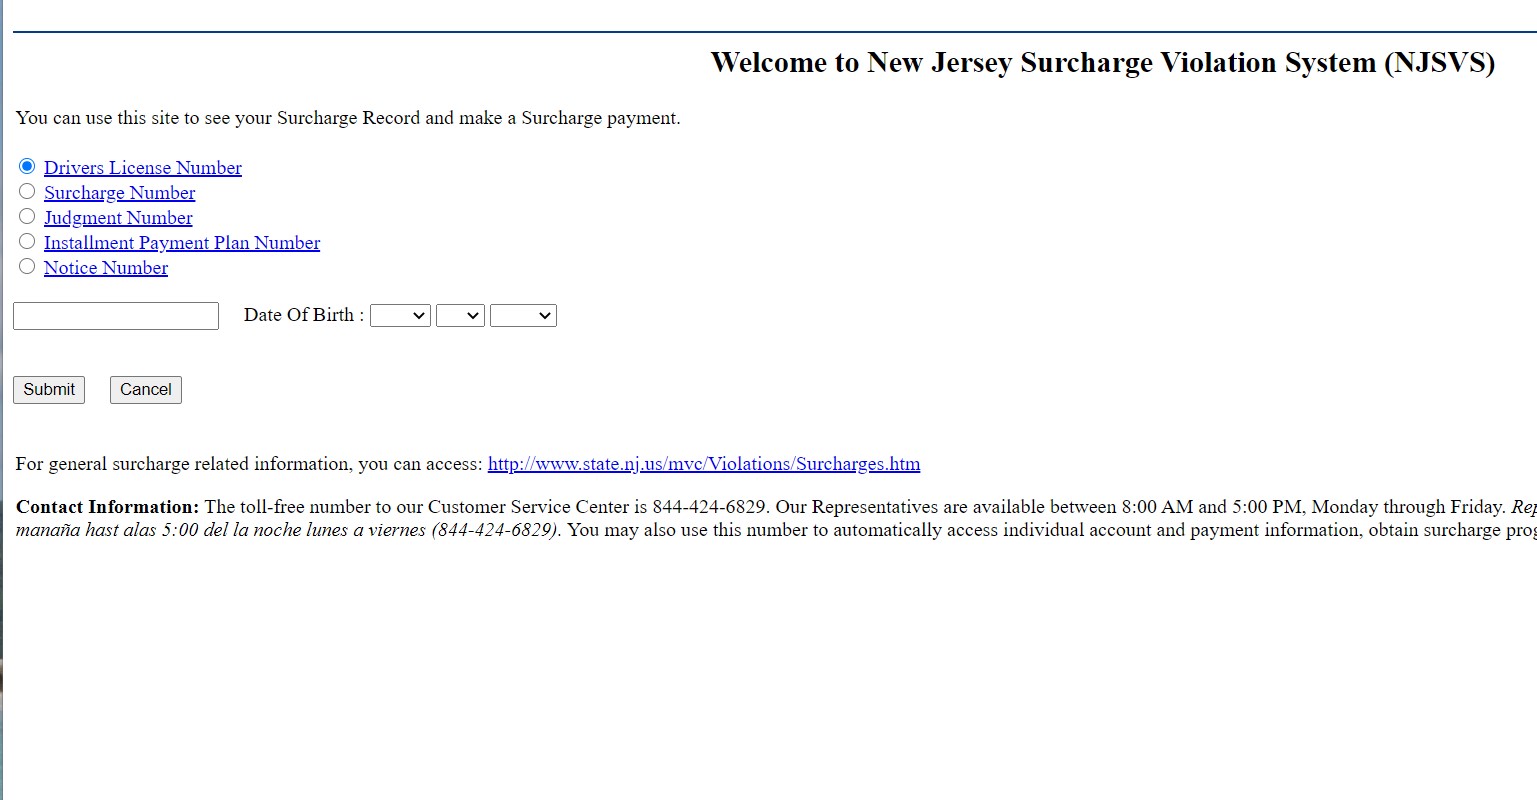 NJ Surcharge Payment Guide